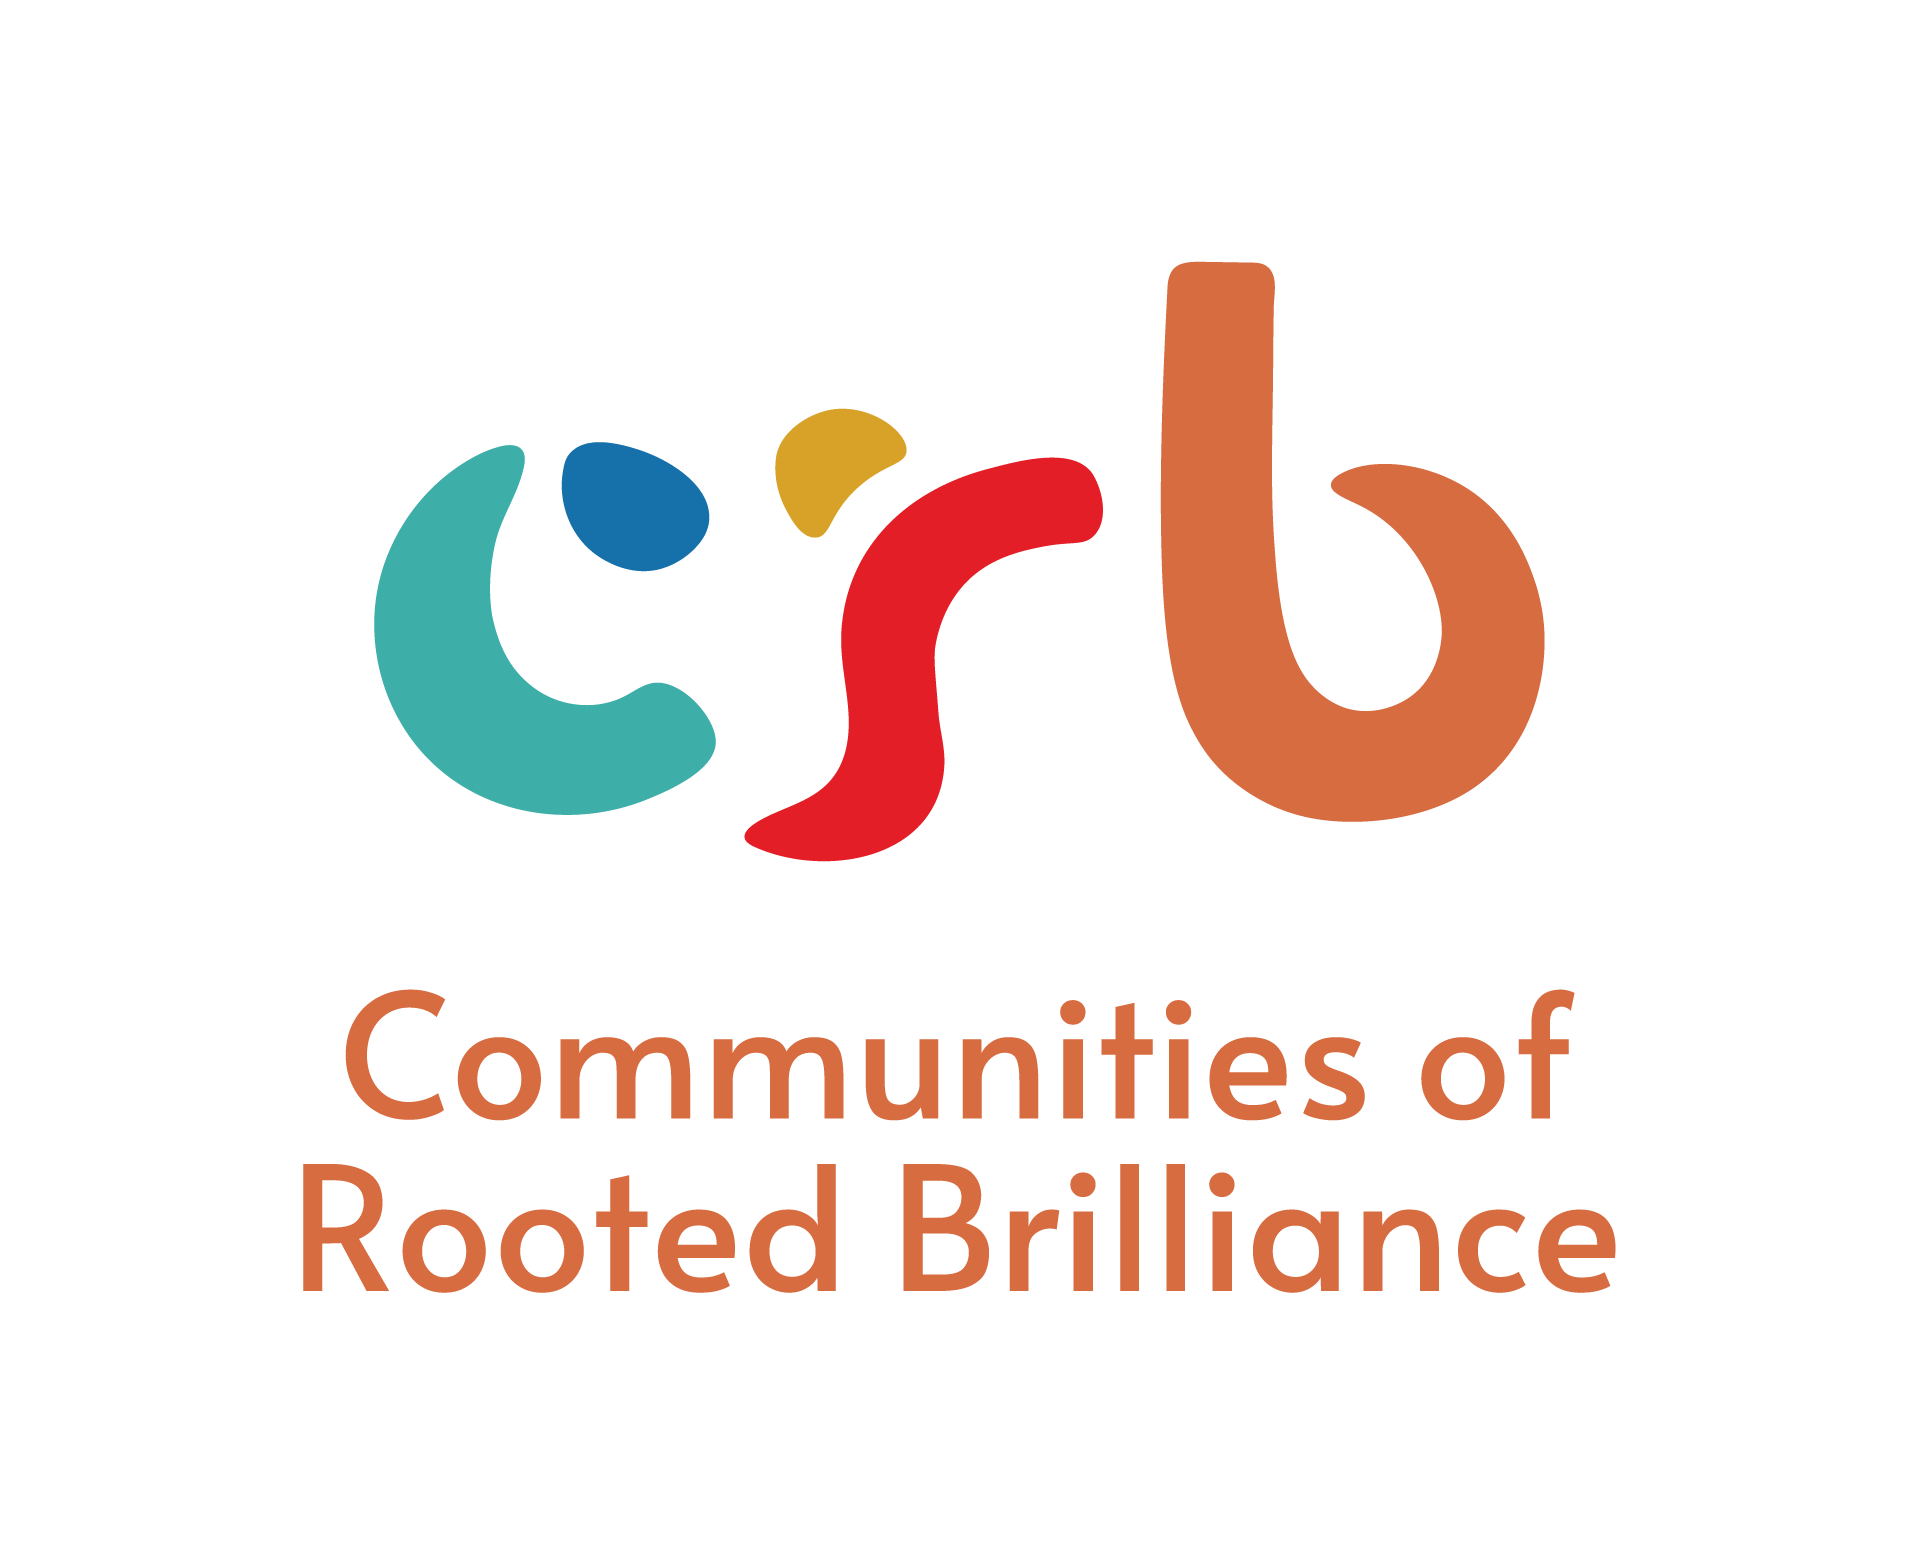 Communities of Rooted Brilliance